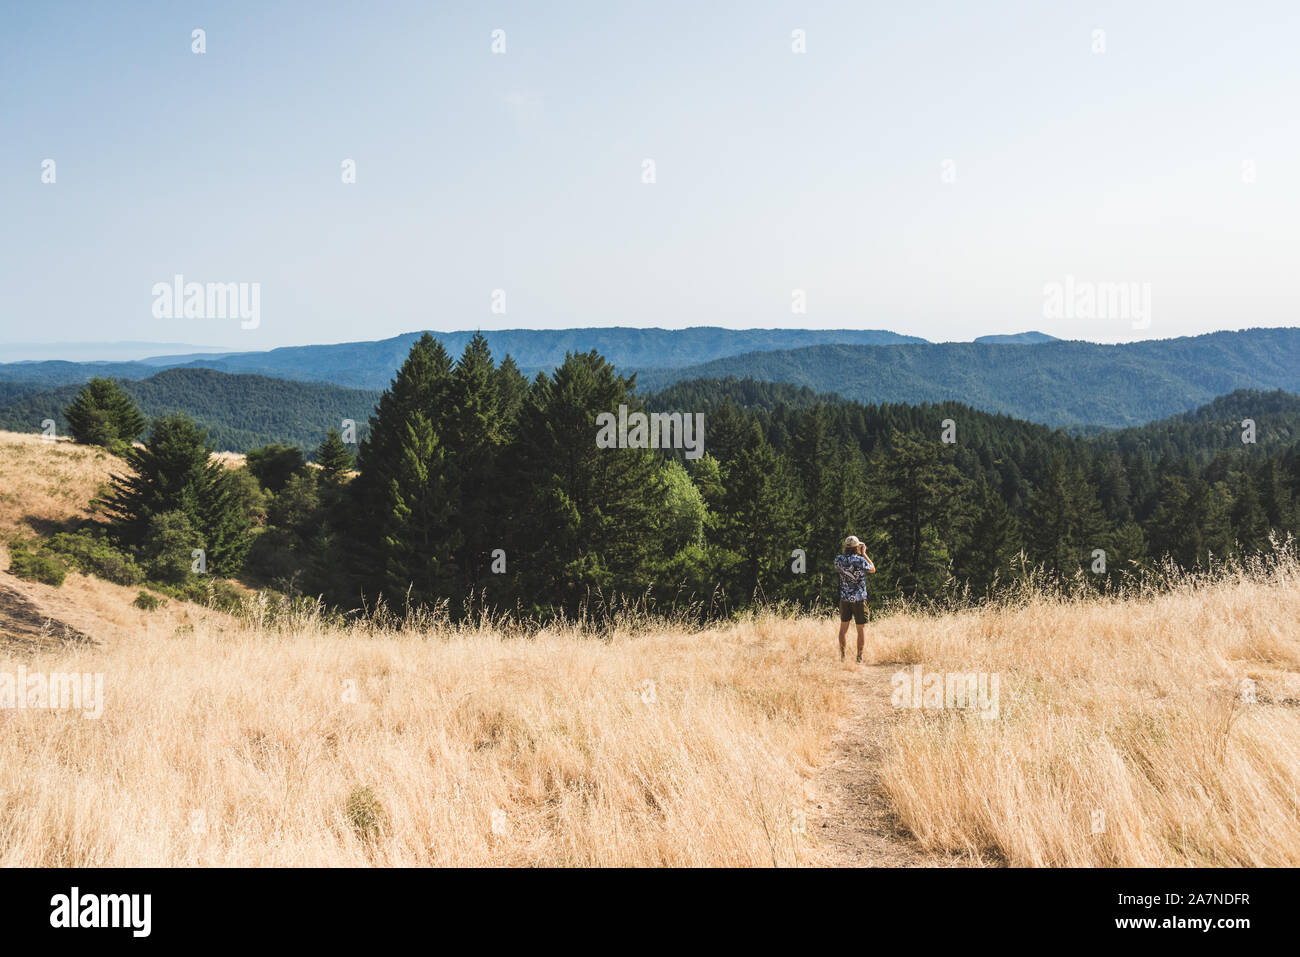 A man overlooks a forest from a hilltop and stops to take a photo. Stock Photo